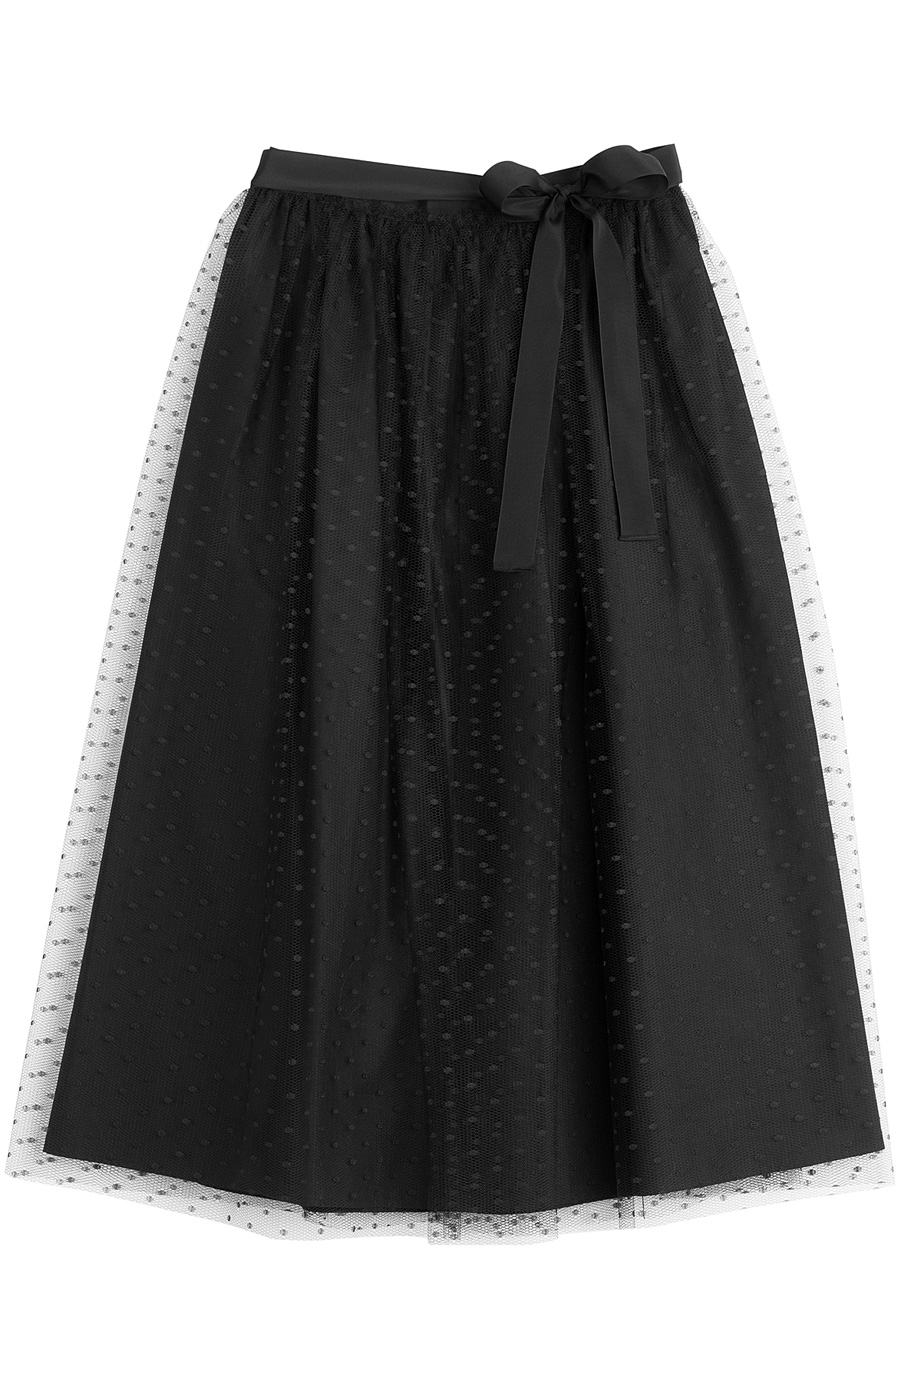 RED Valentino - Black Mid-Length Skirt with Tulle | FASHION STYLE FAN